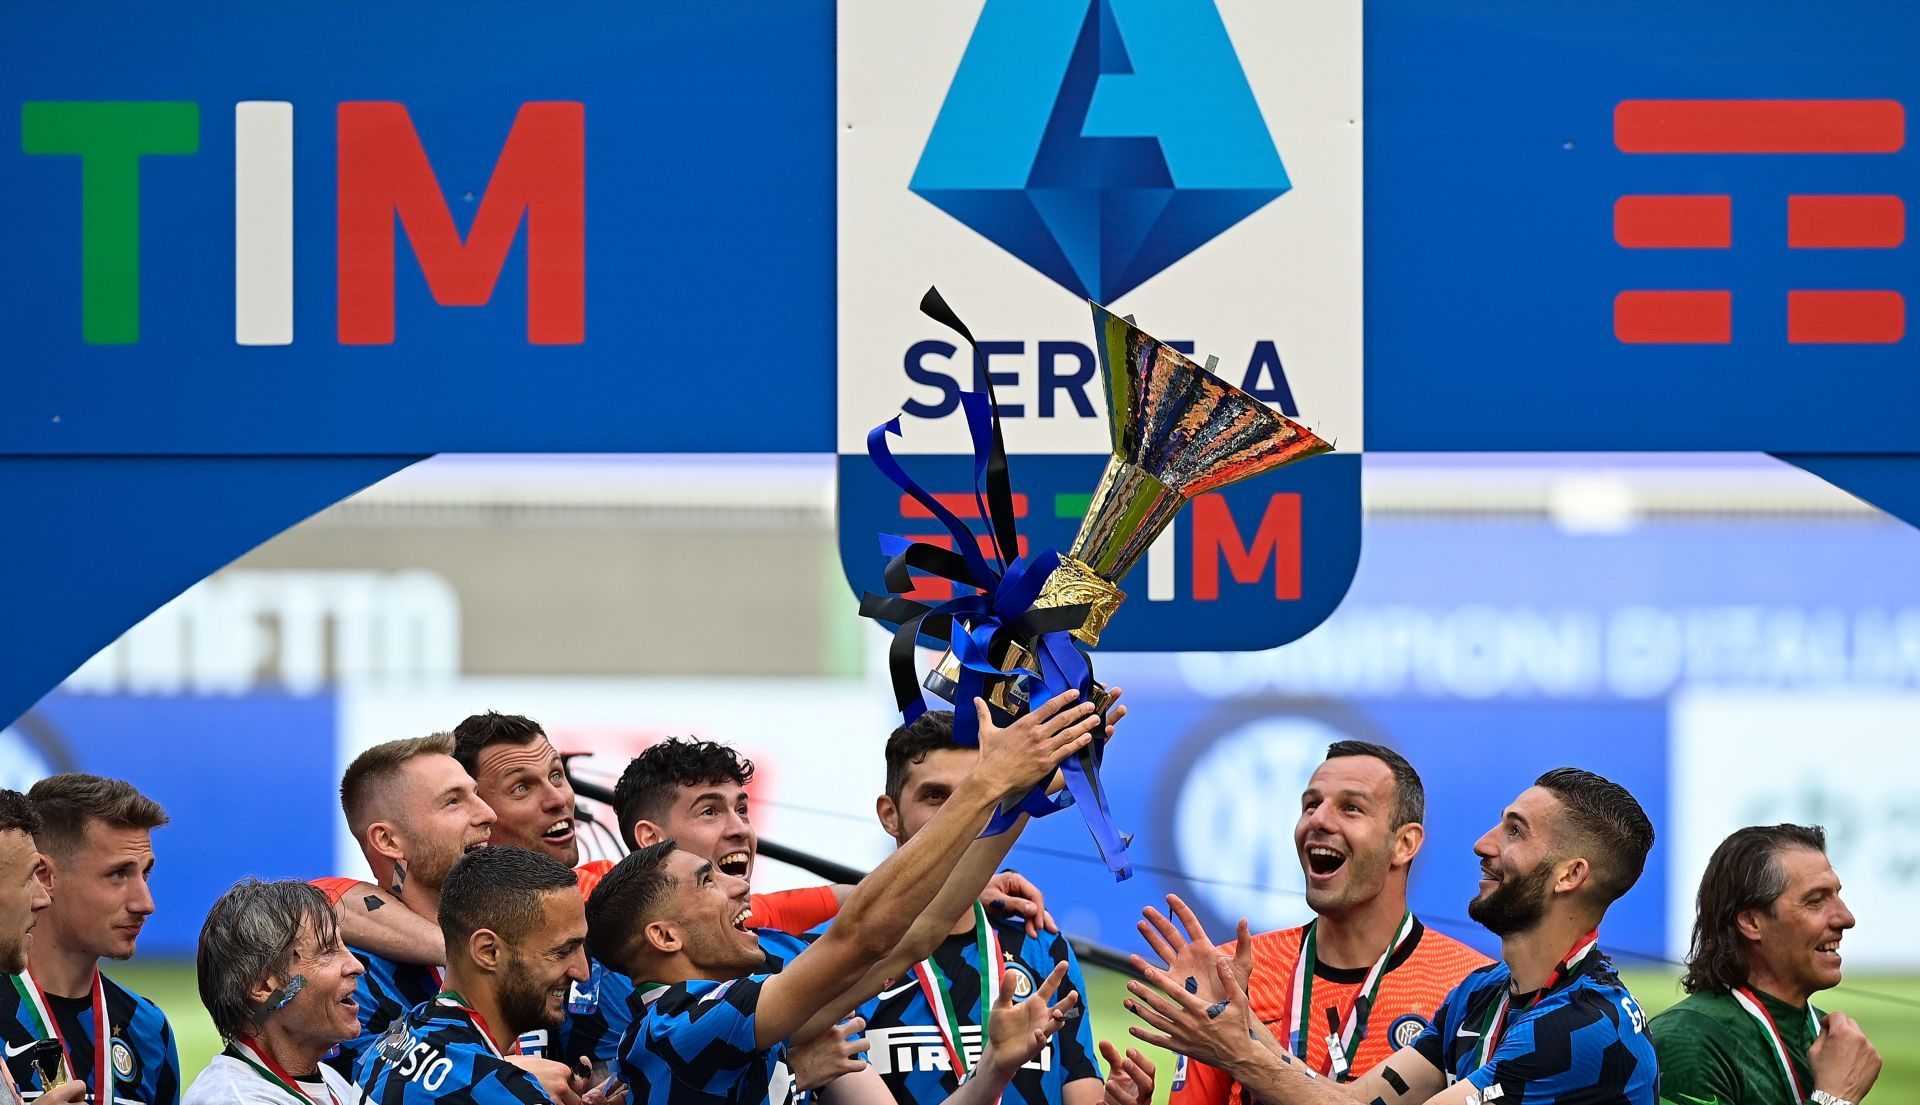 Inter Milan stunned Juventus on their way to the 2021 Serie A title.